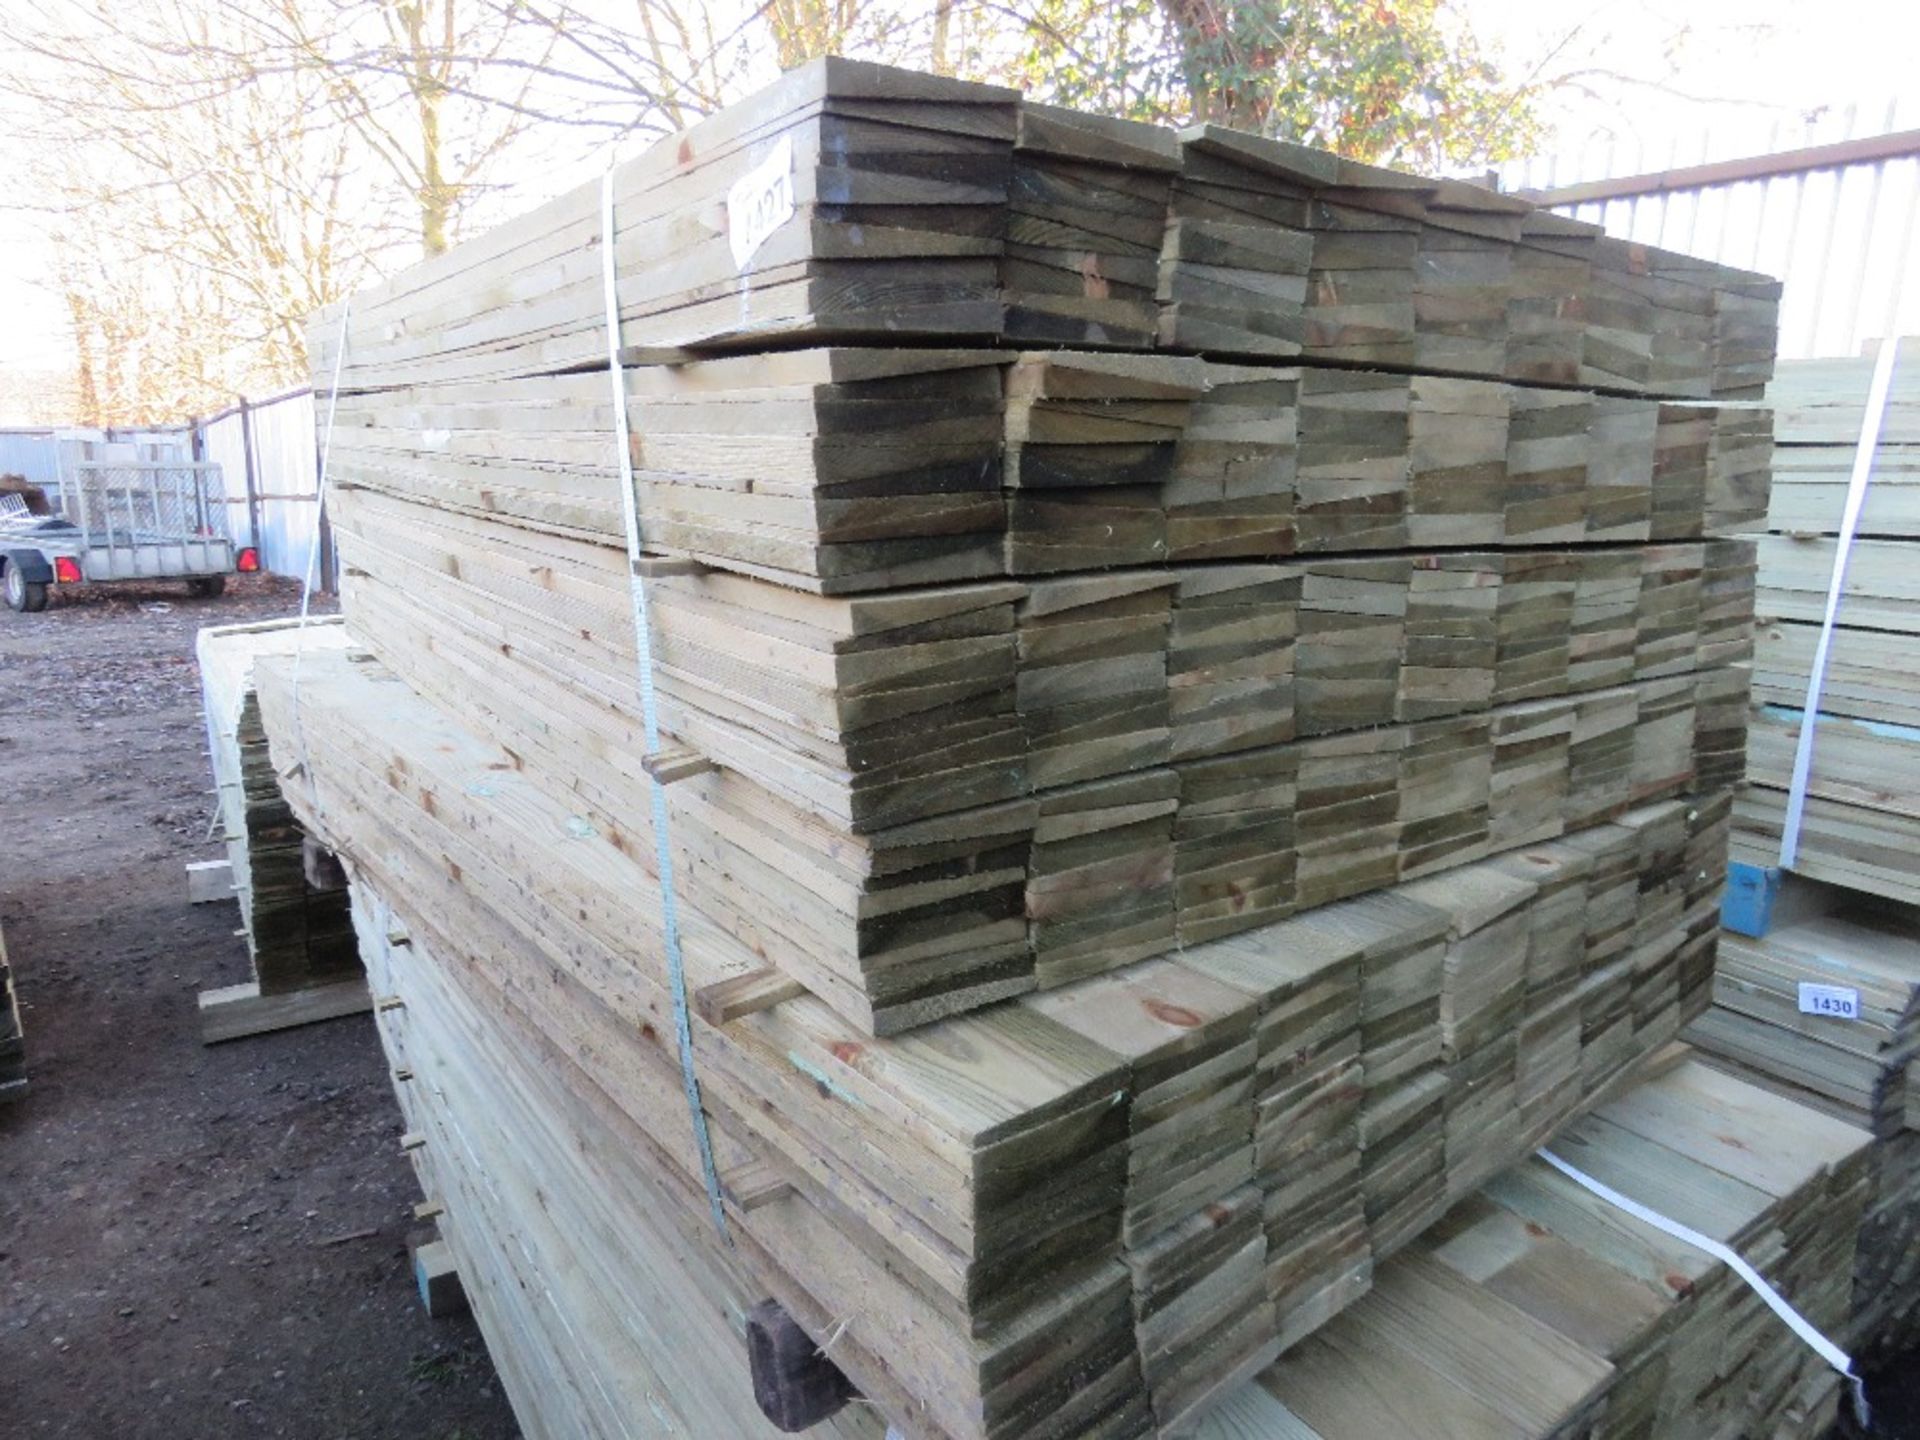 LARGE PACK OF TREATED FEATHER EDGE FENCE CLADDING TIMBER BOARDS. SIZE: 1.5M LENGTH X 10CM WIDTH APPR